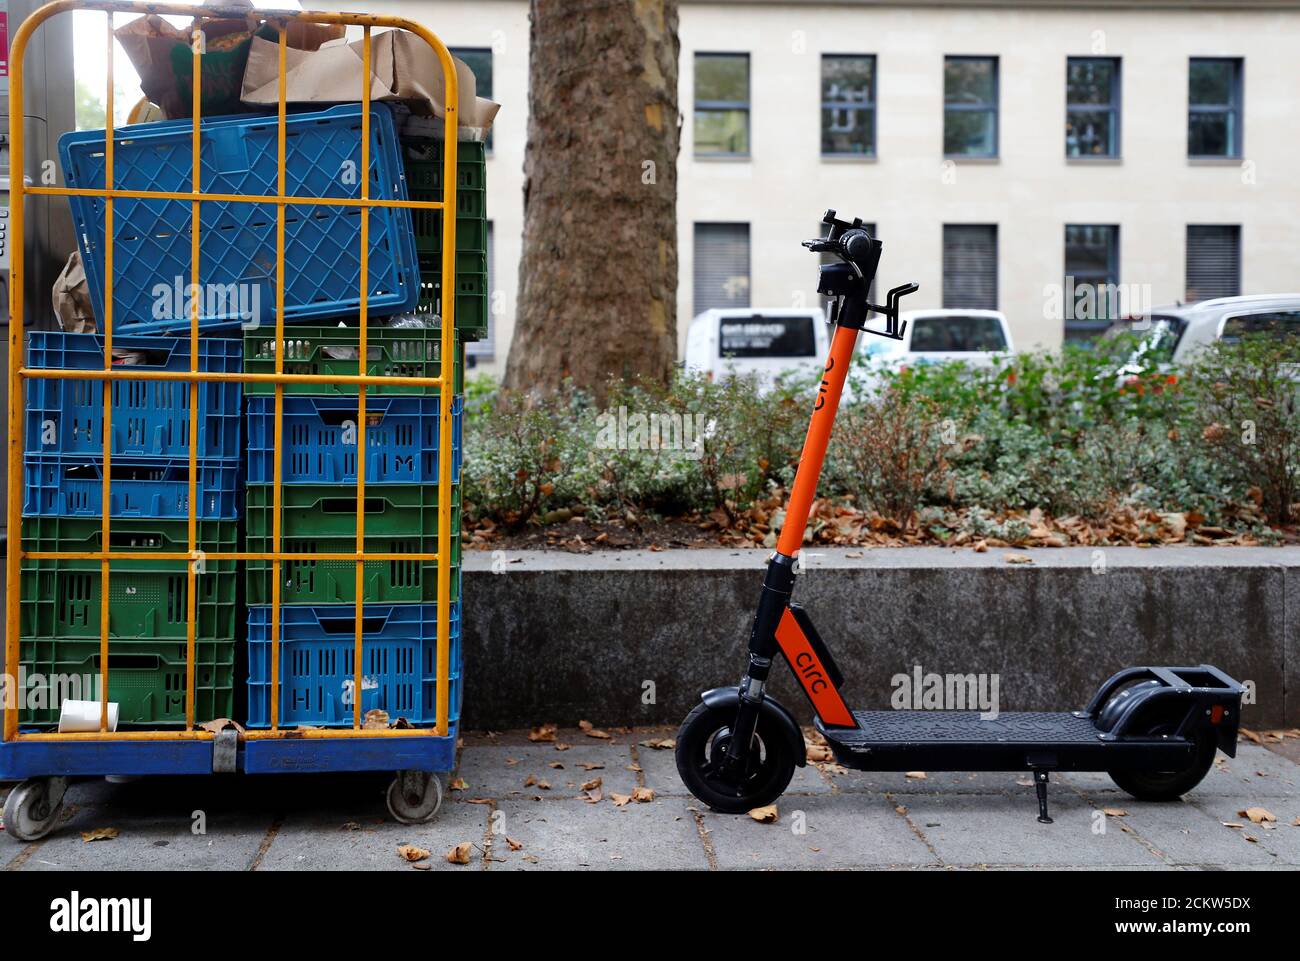 Circ Scooter High Resolution Stock Photography and Images - Alamy